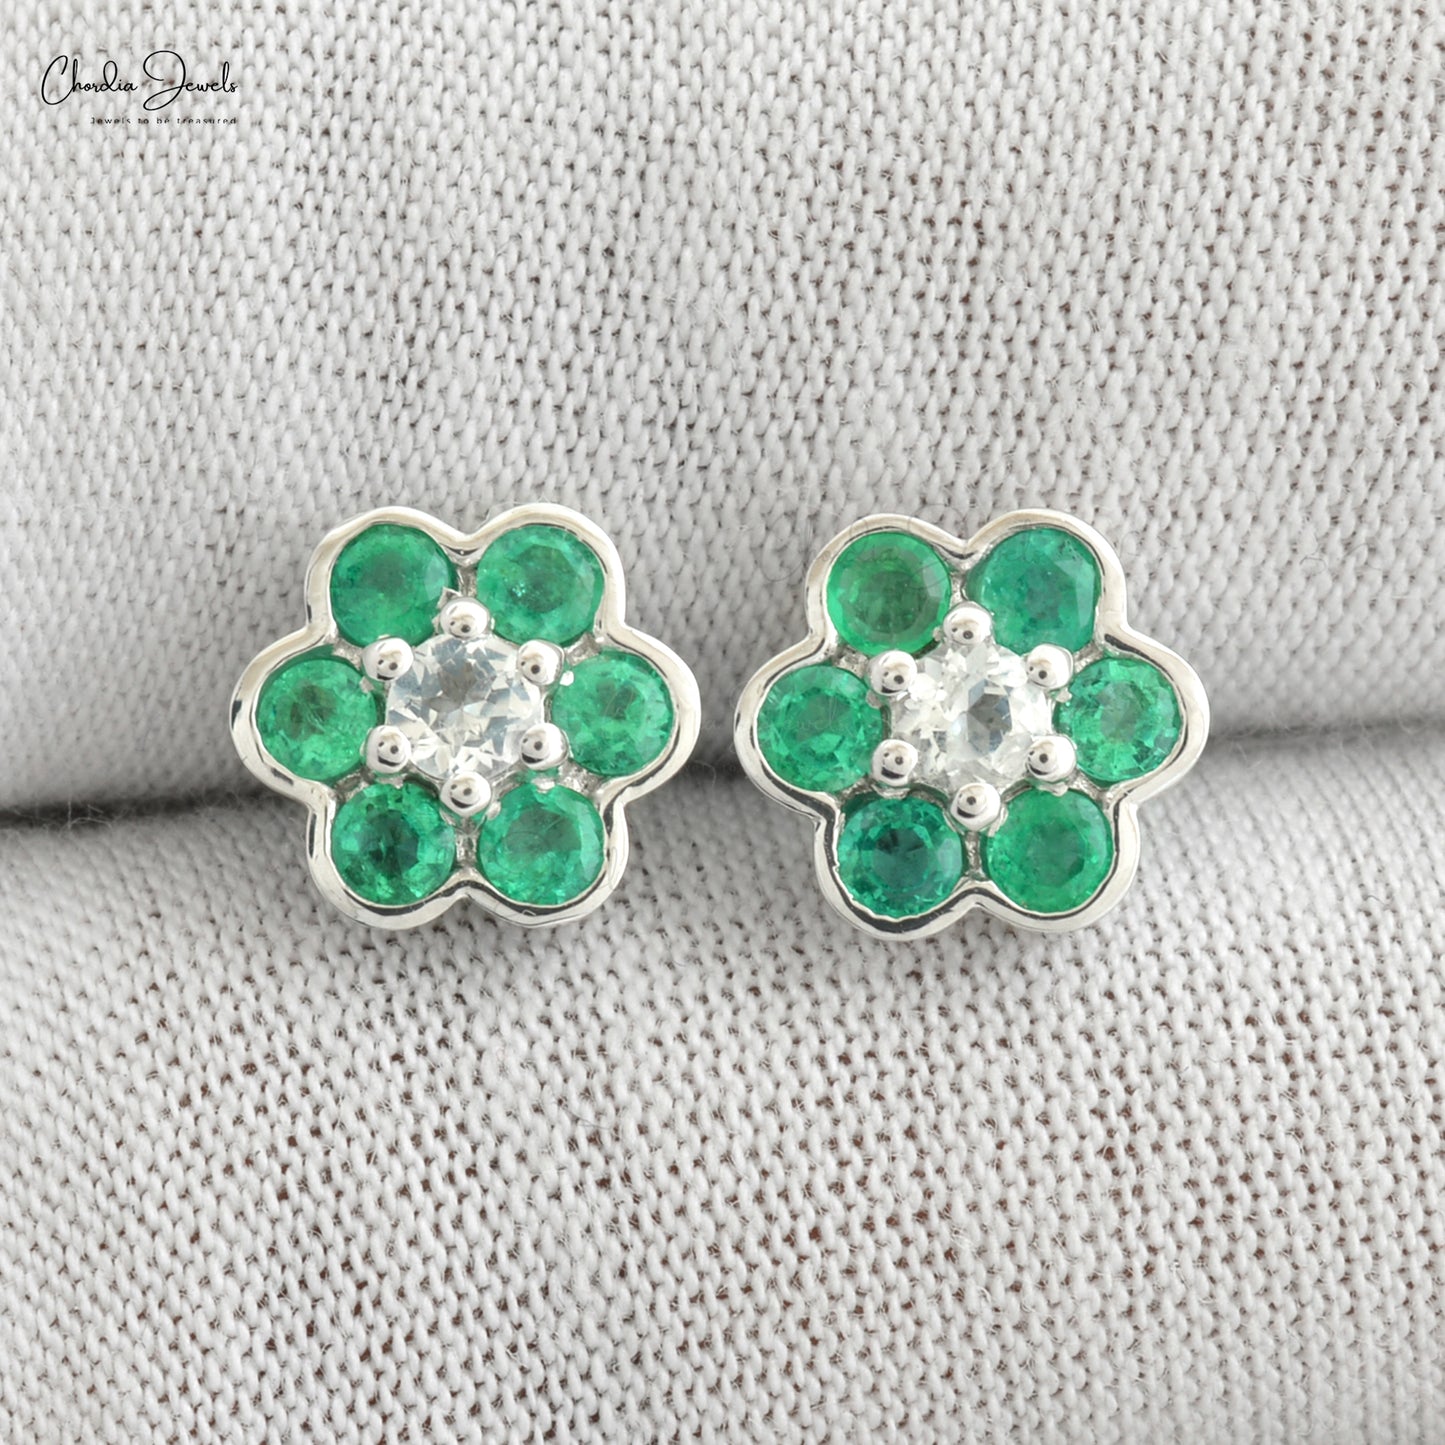 Adorn yourself with our emerald and topaz earrings.